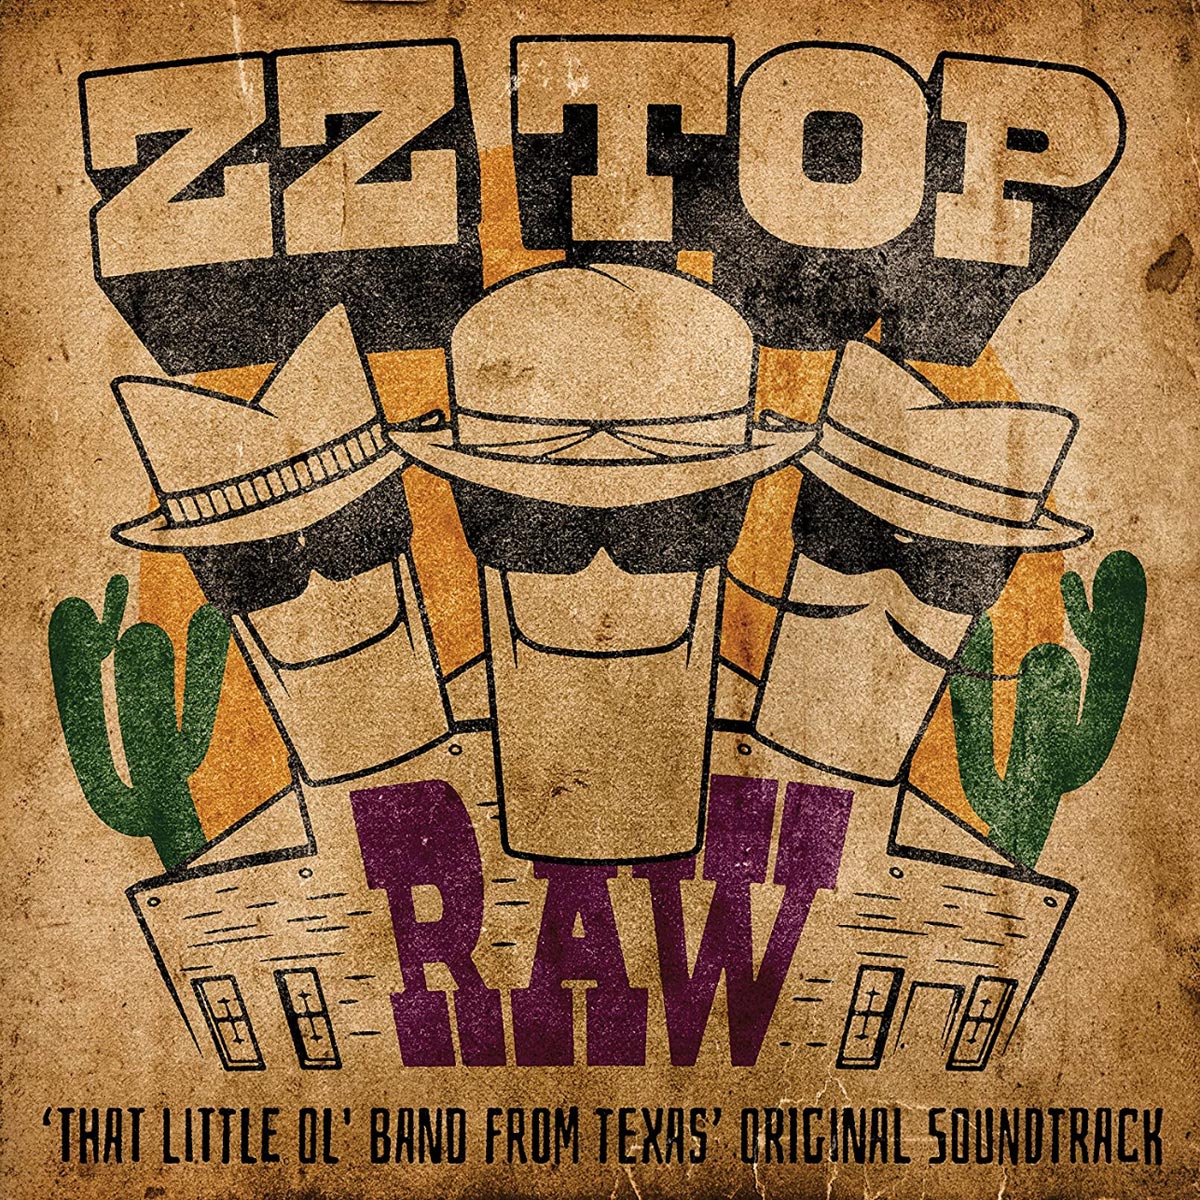 ZZ Top: Raw (That little ol' band from Texas)